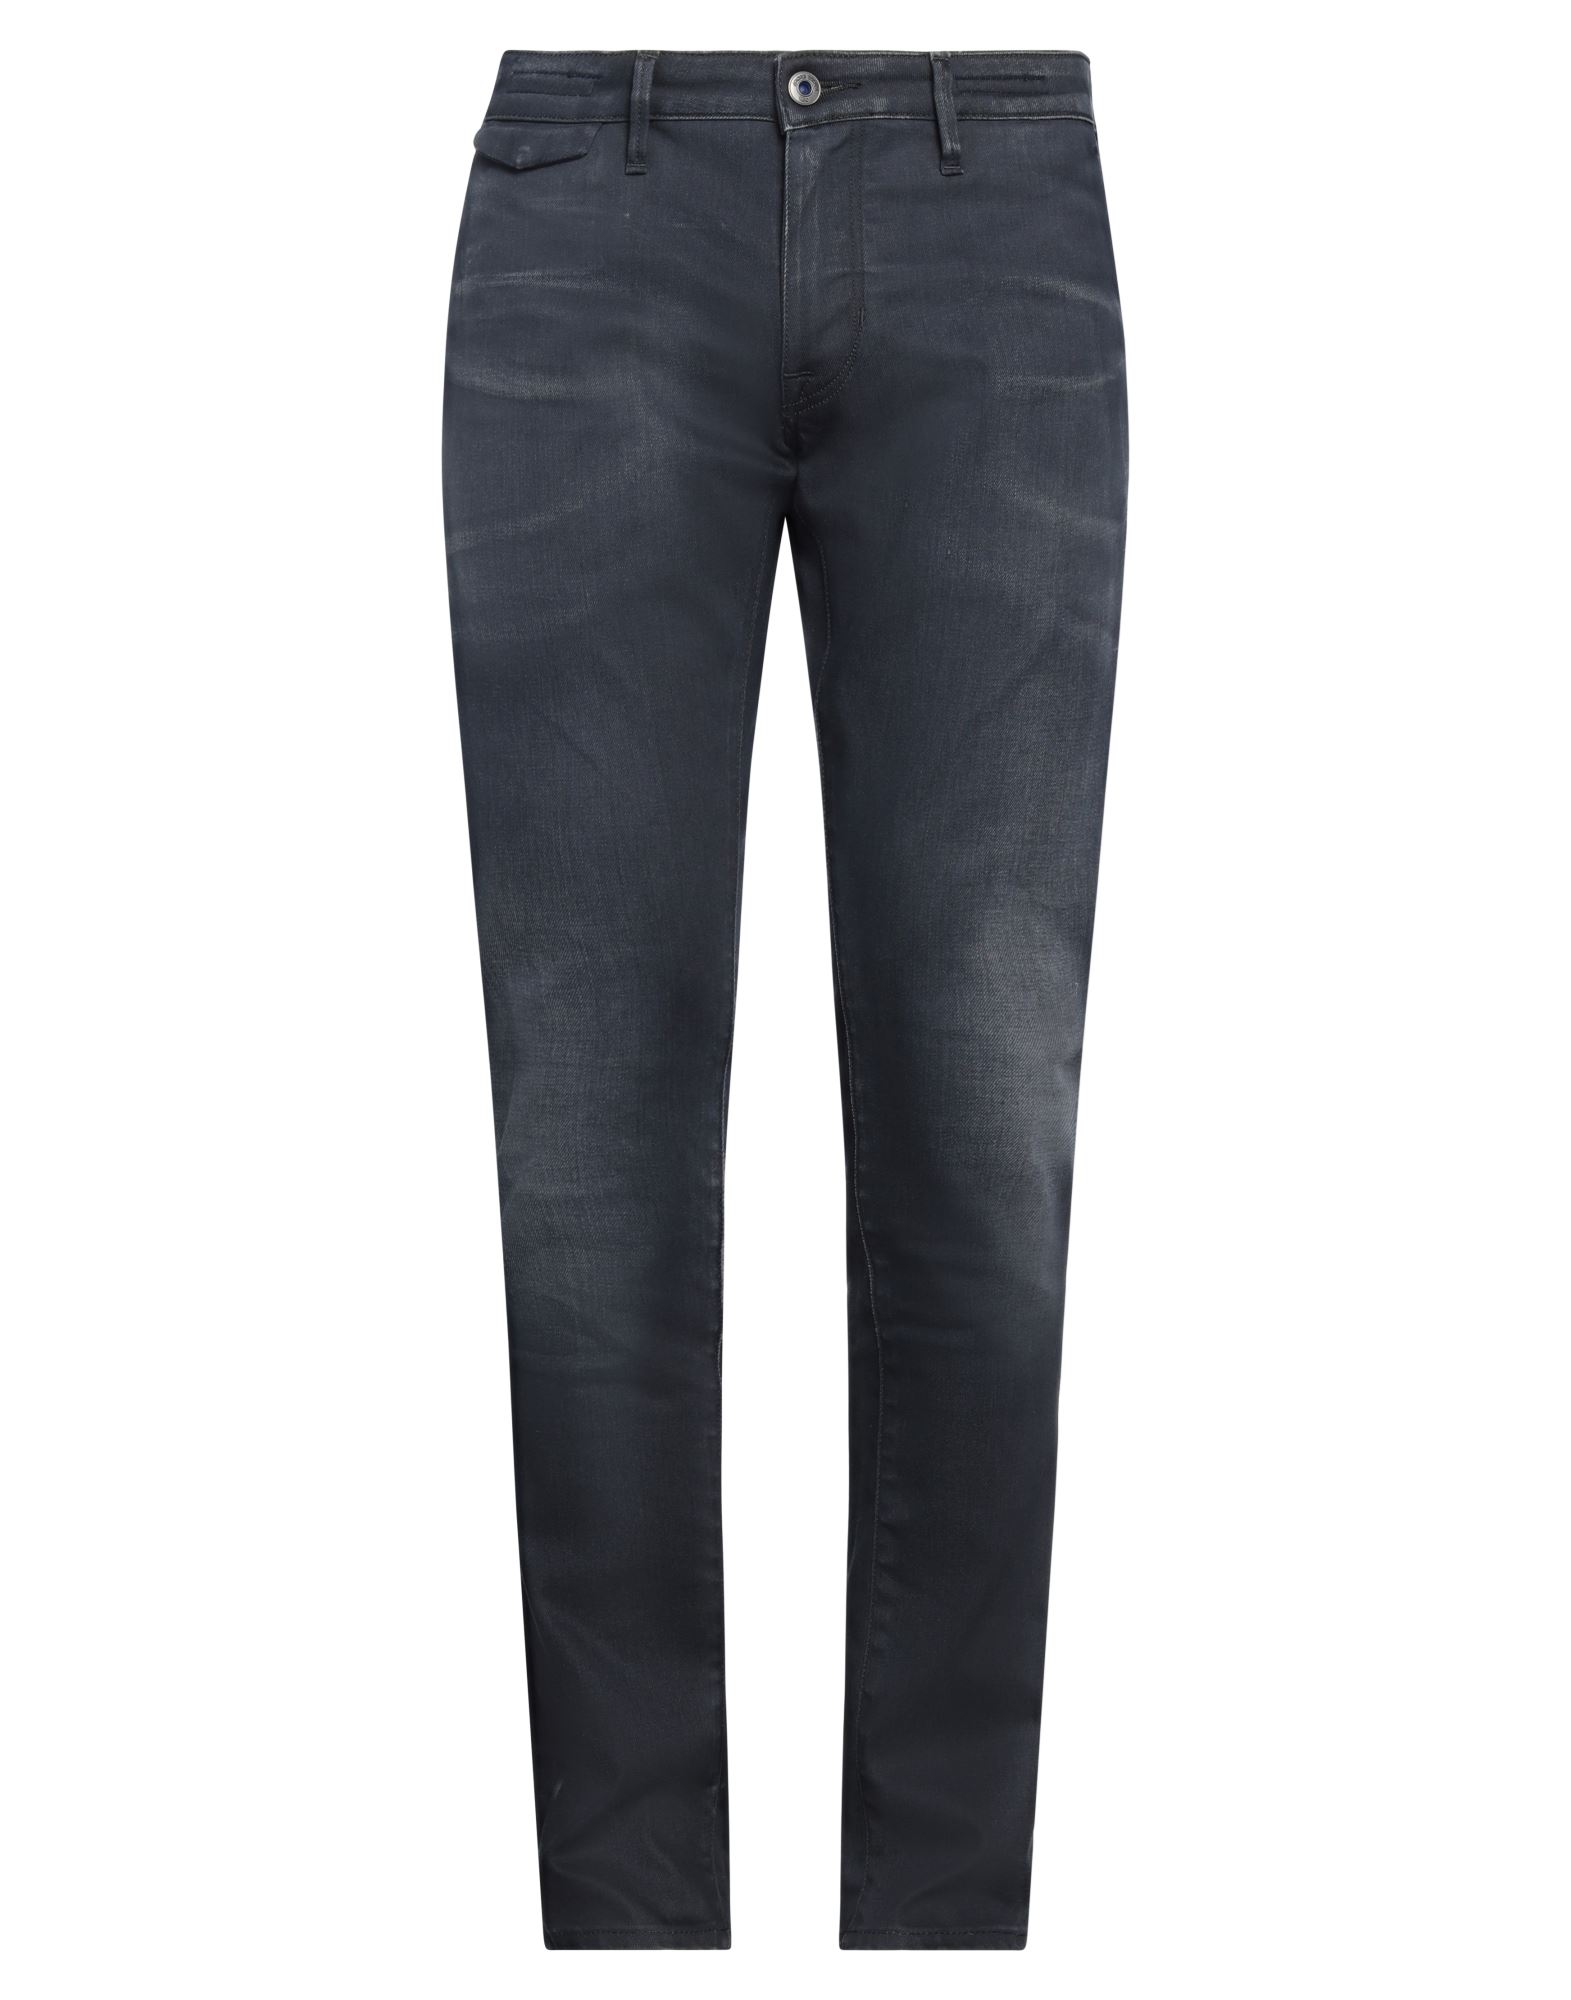 Jacob Cohёn Jeans In Navy Blue